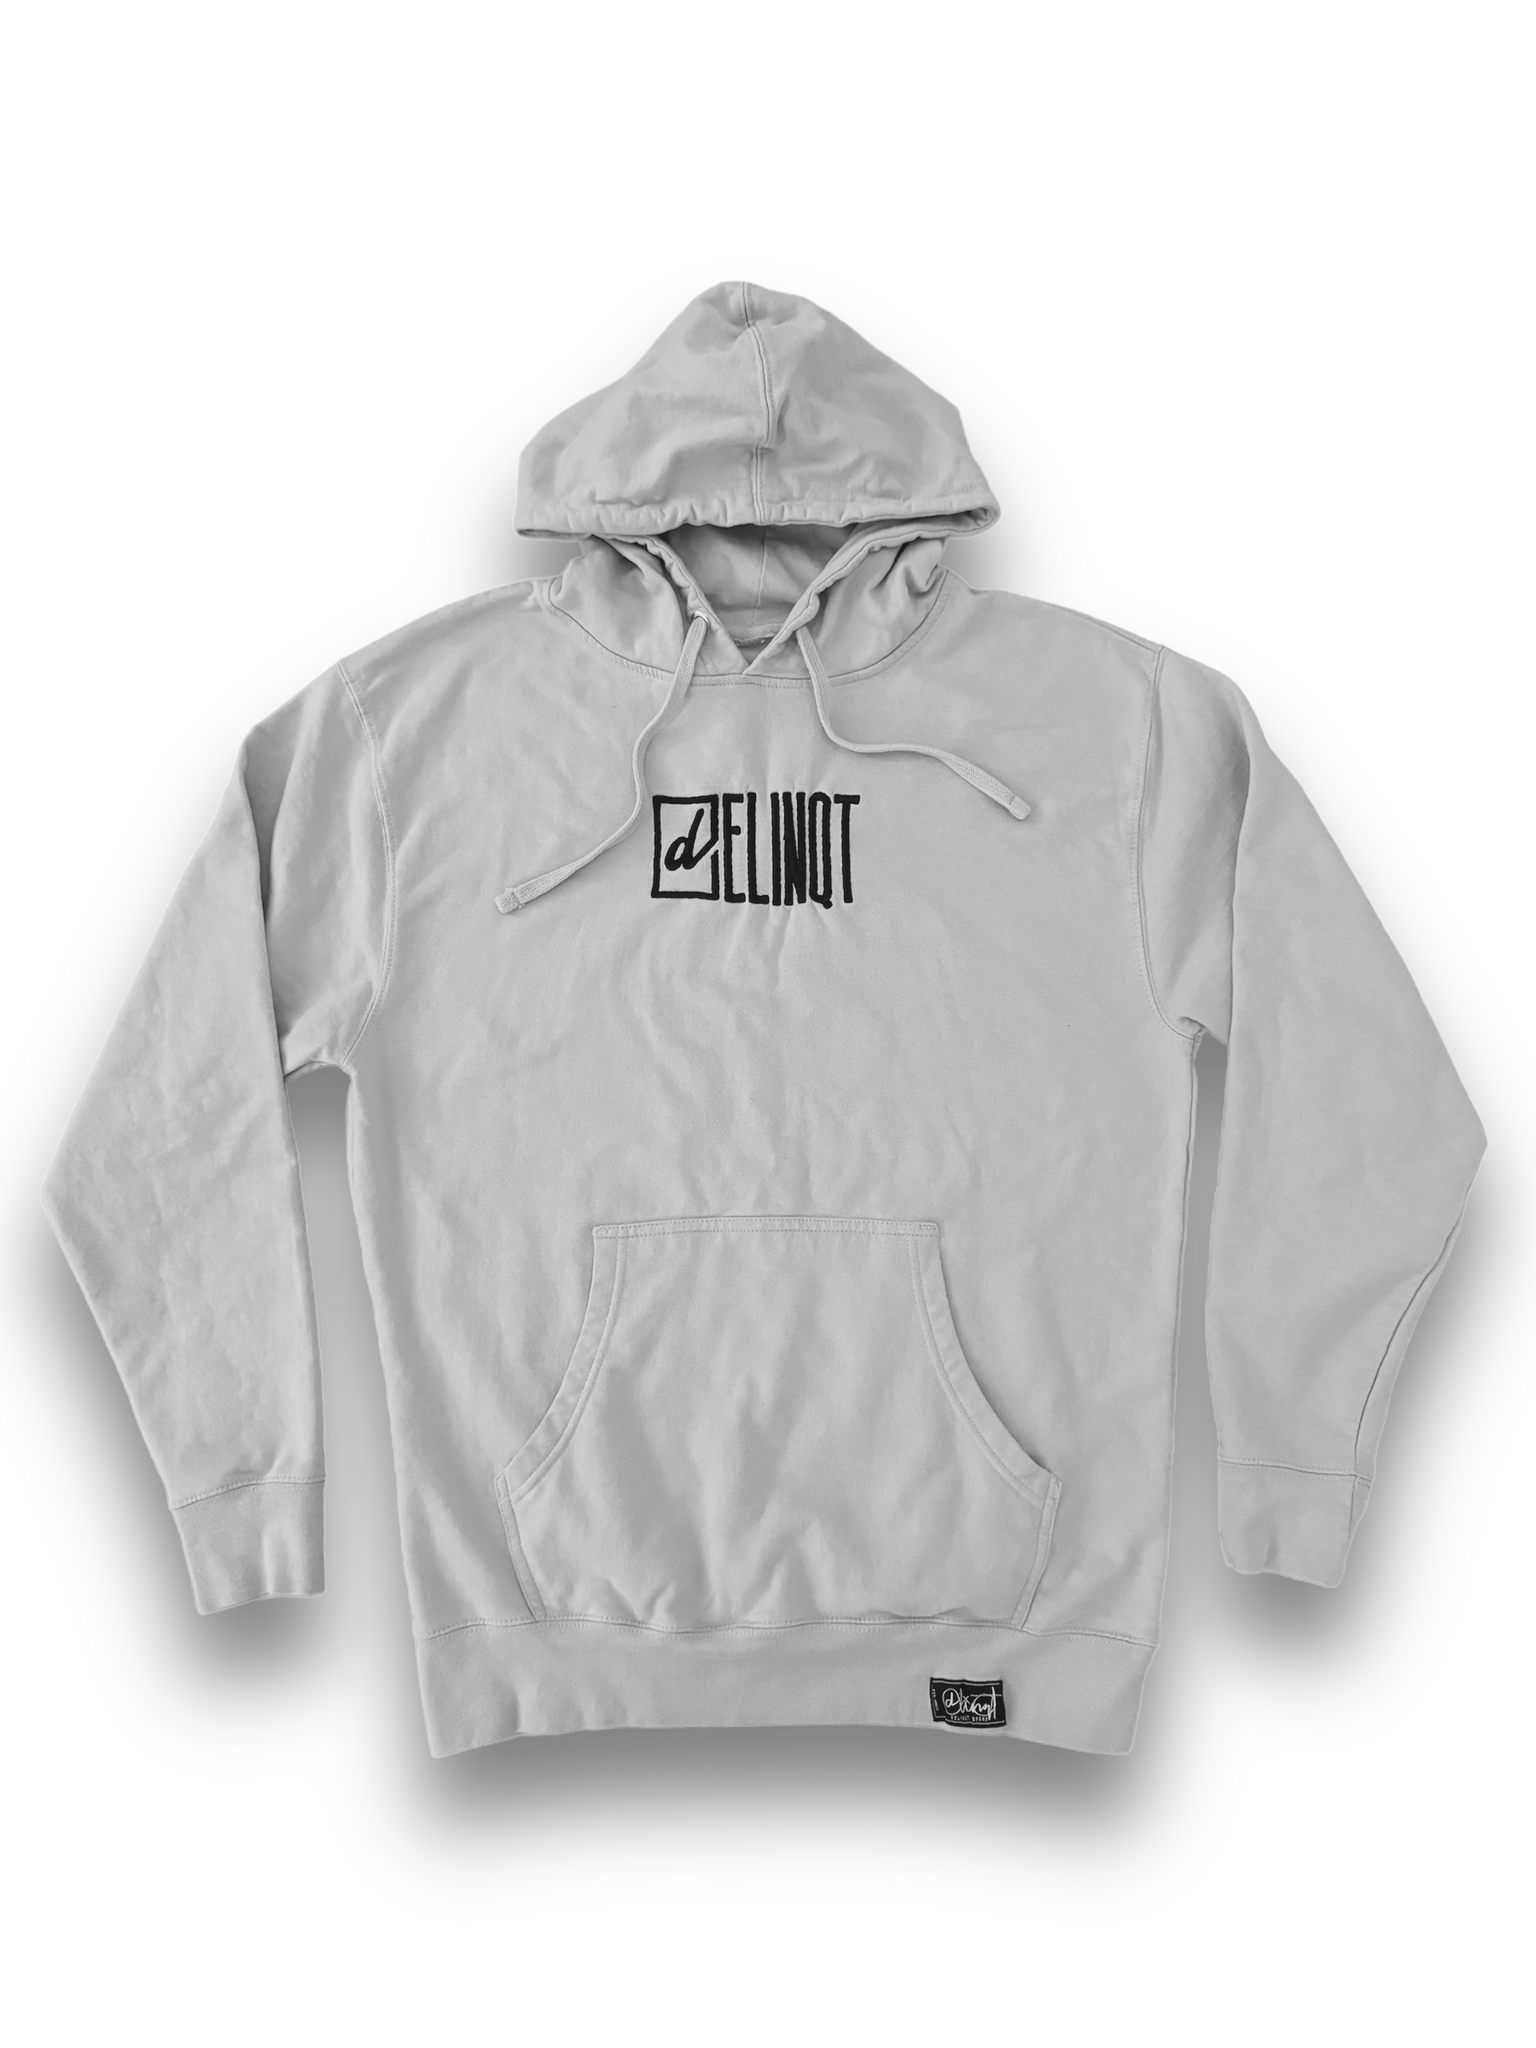 Delinqt Embroidered Hoodie (Cement)